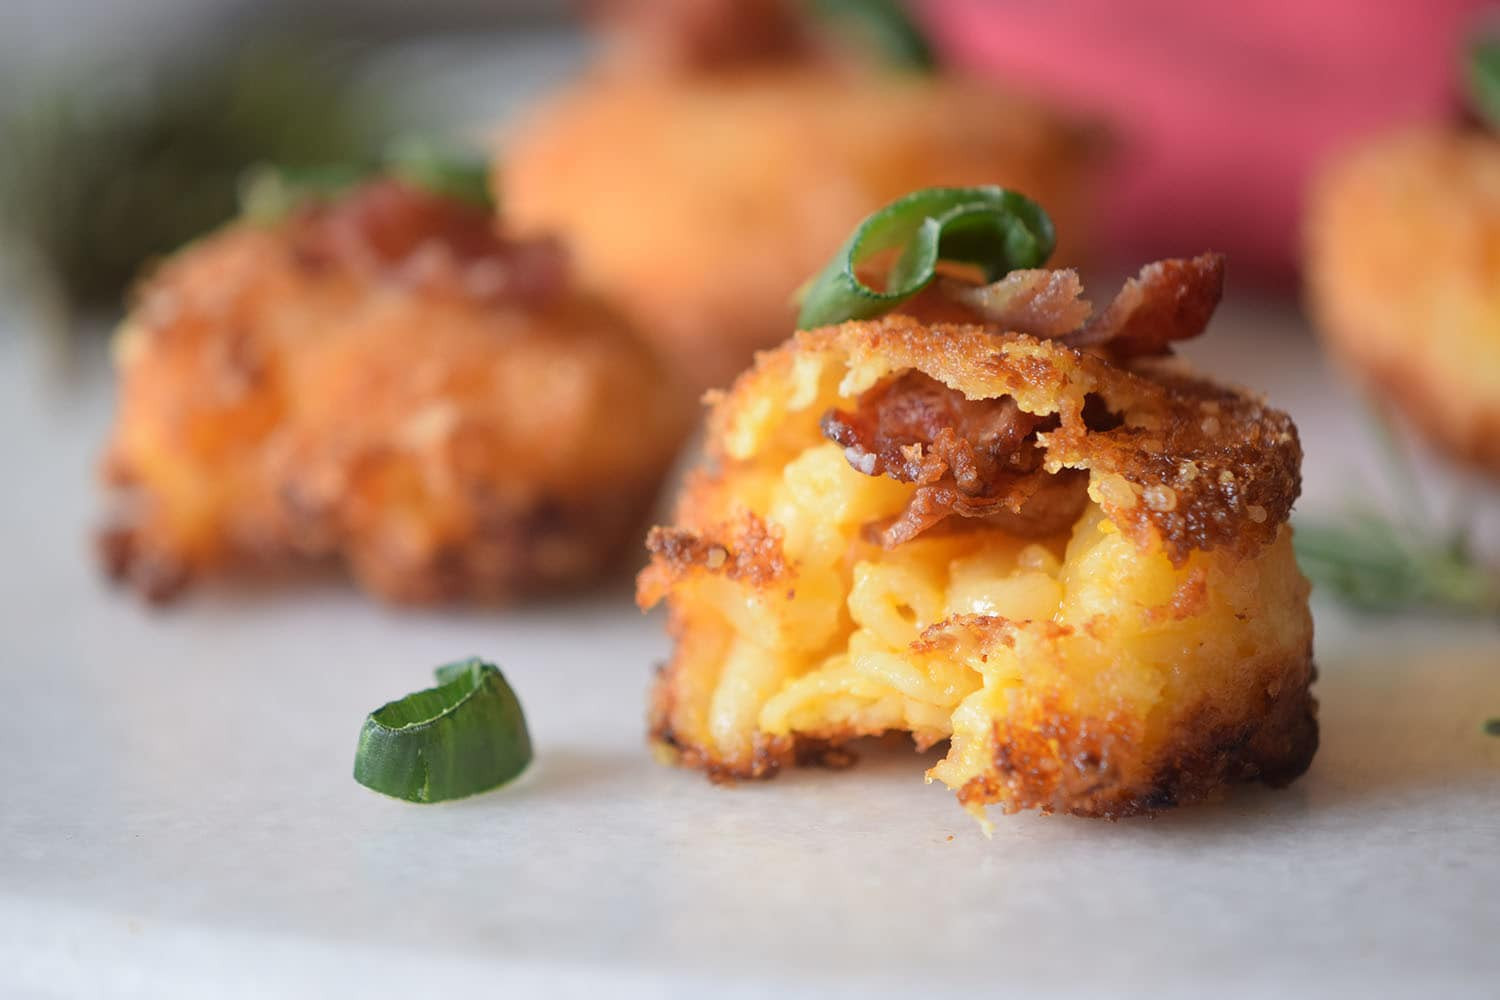 Easy Bacon Appetizers
 20 Best Easy Bacon Appetizers Recipes EVER